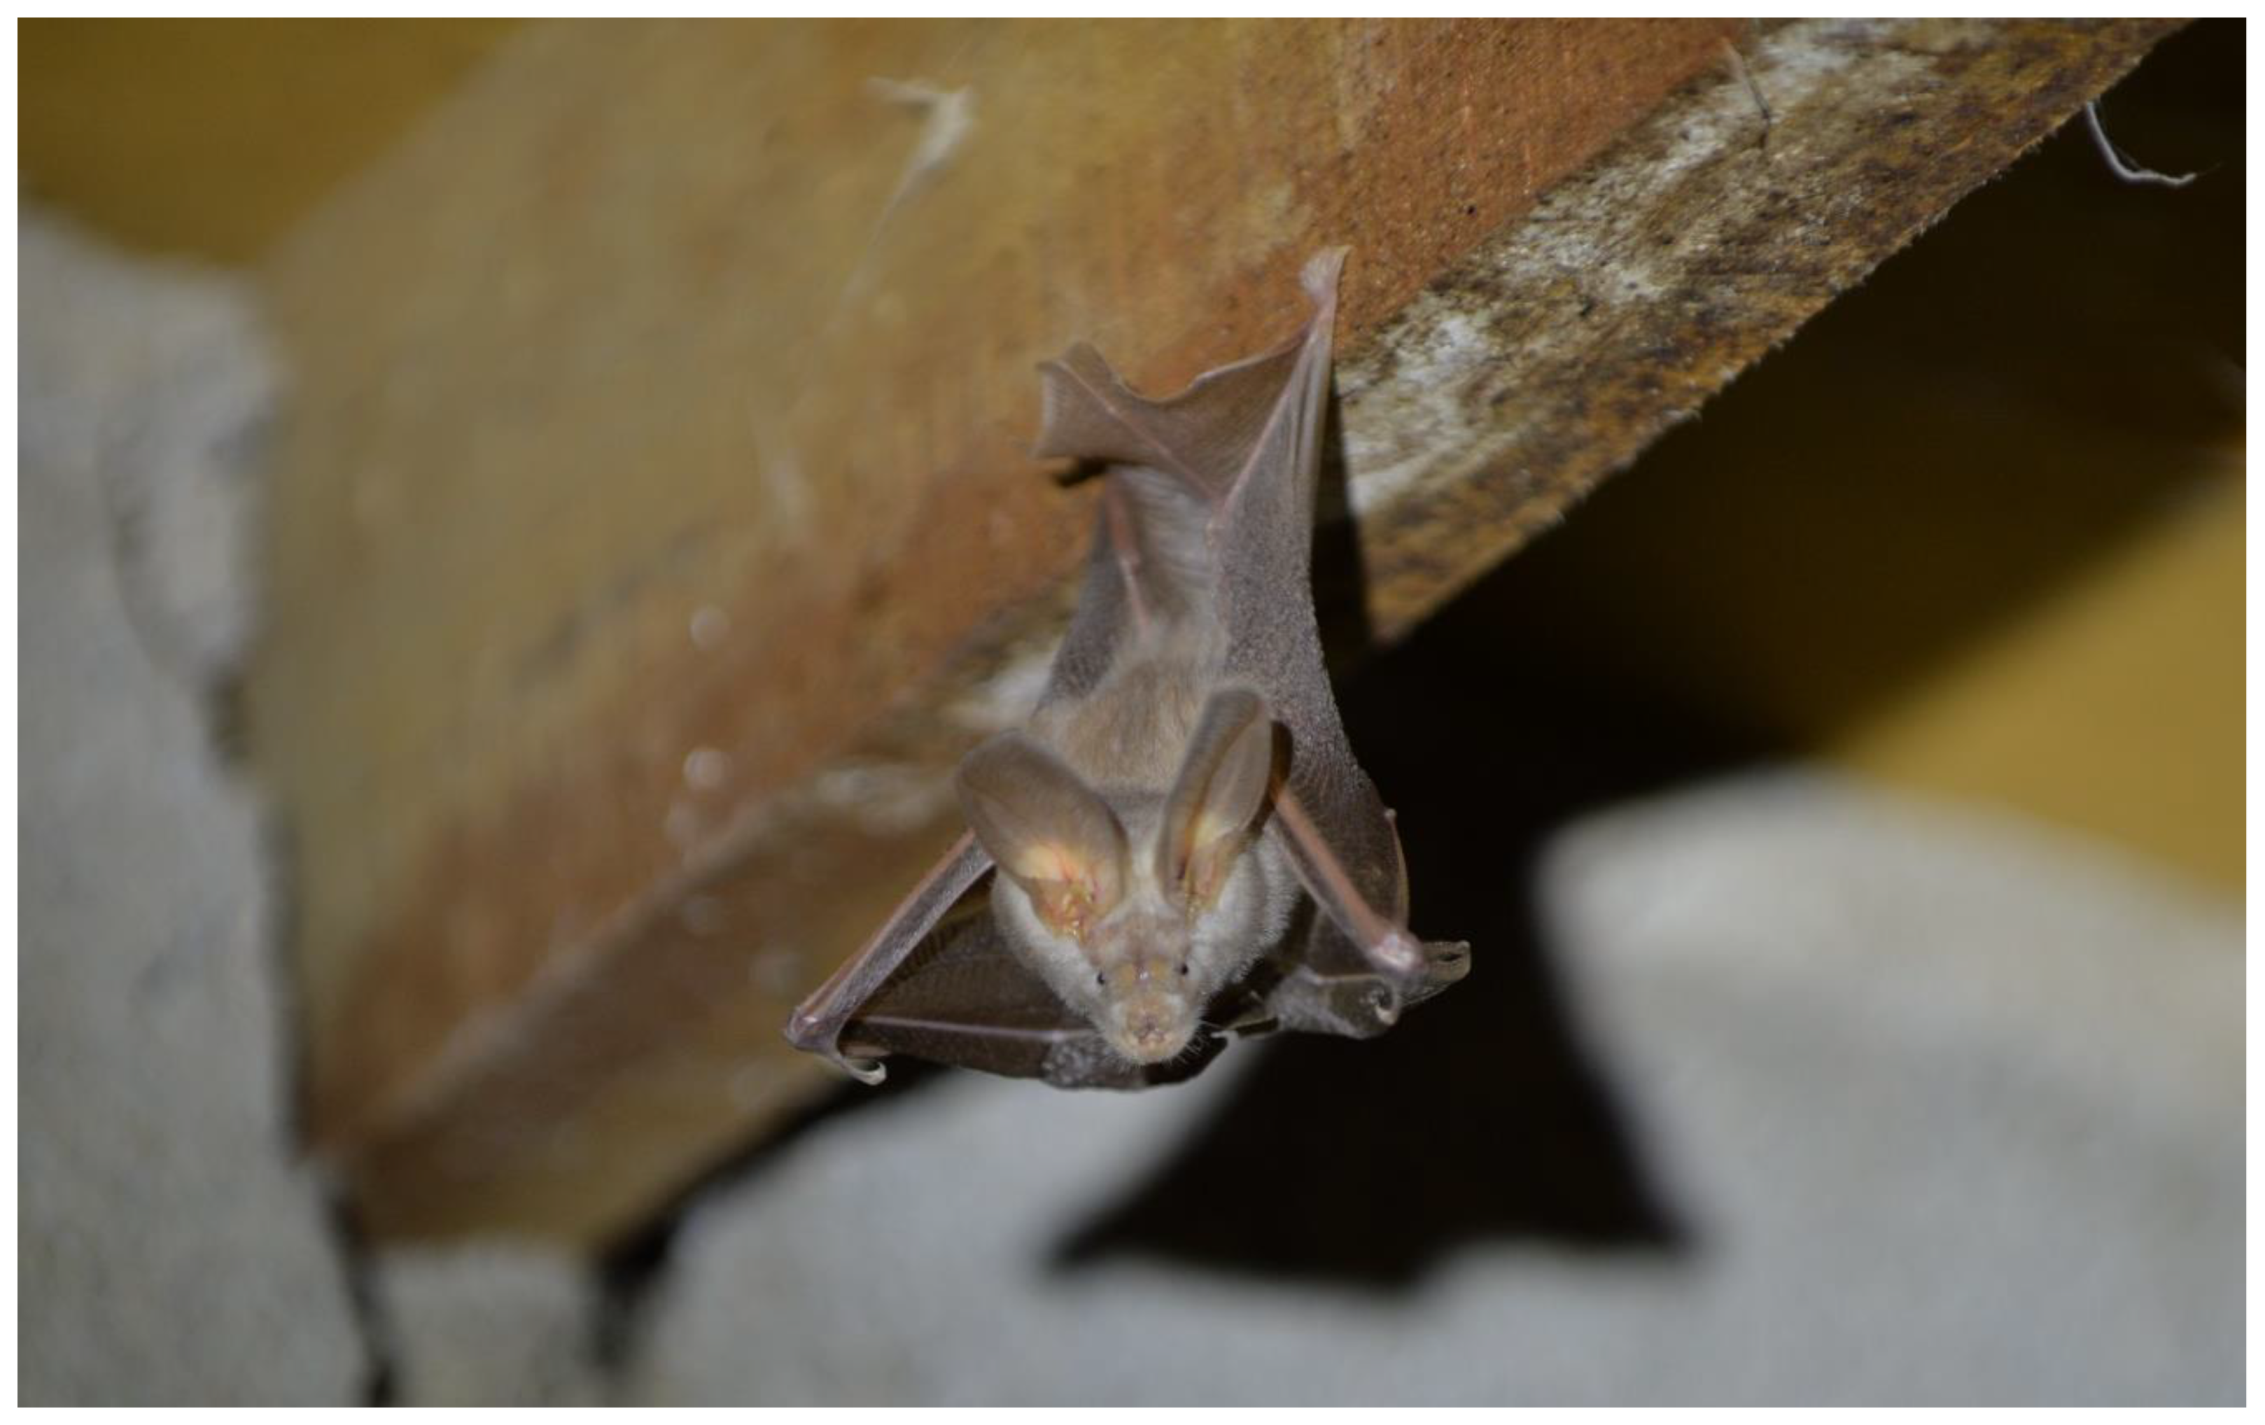 lesser mouse tailed bat